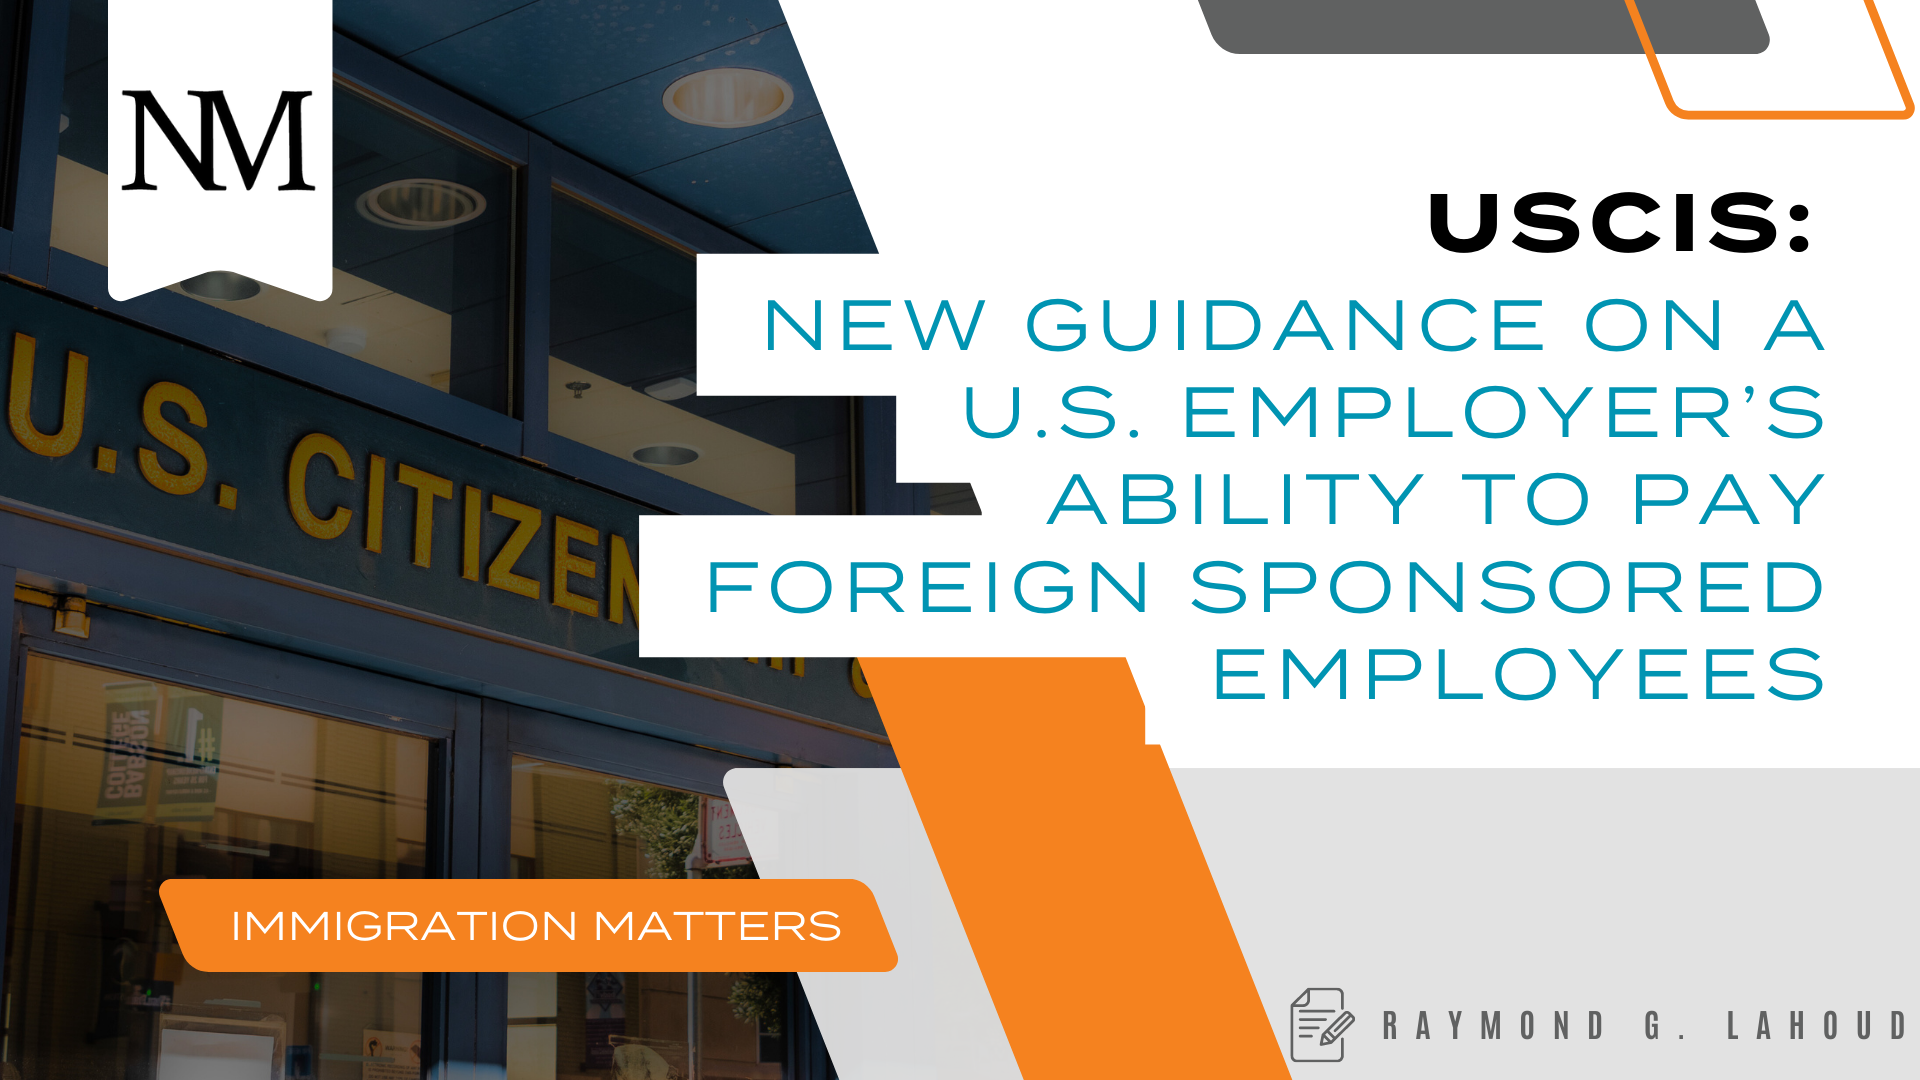 USCIS’ New Guidance on a U.S. Employer’s Ability to Pay Foreign Sponsored Employees